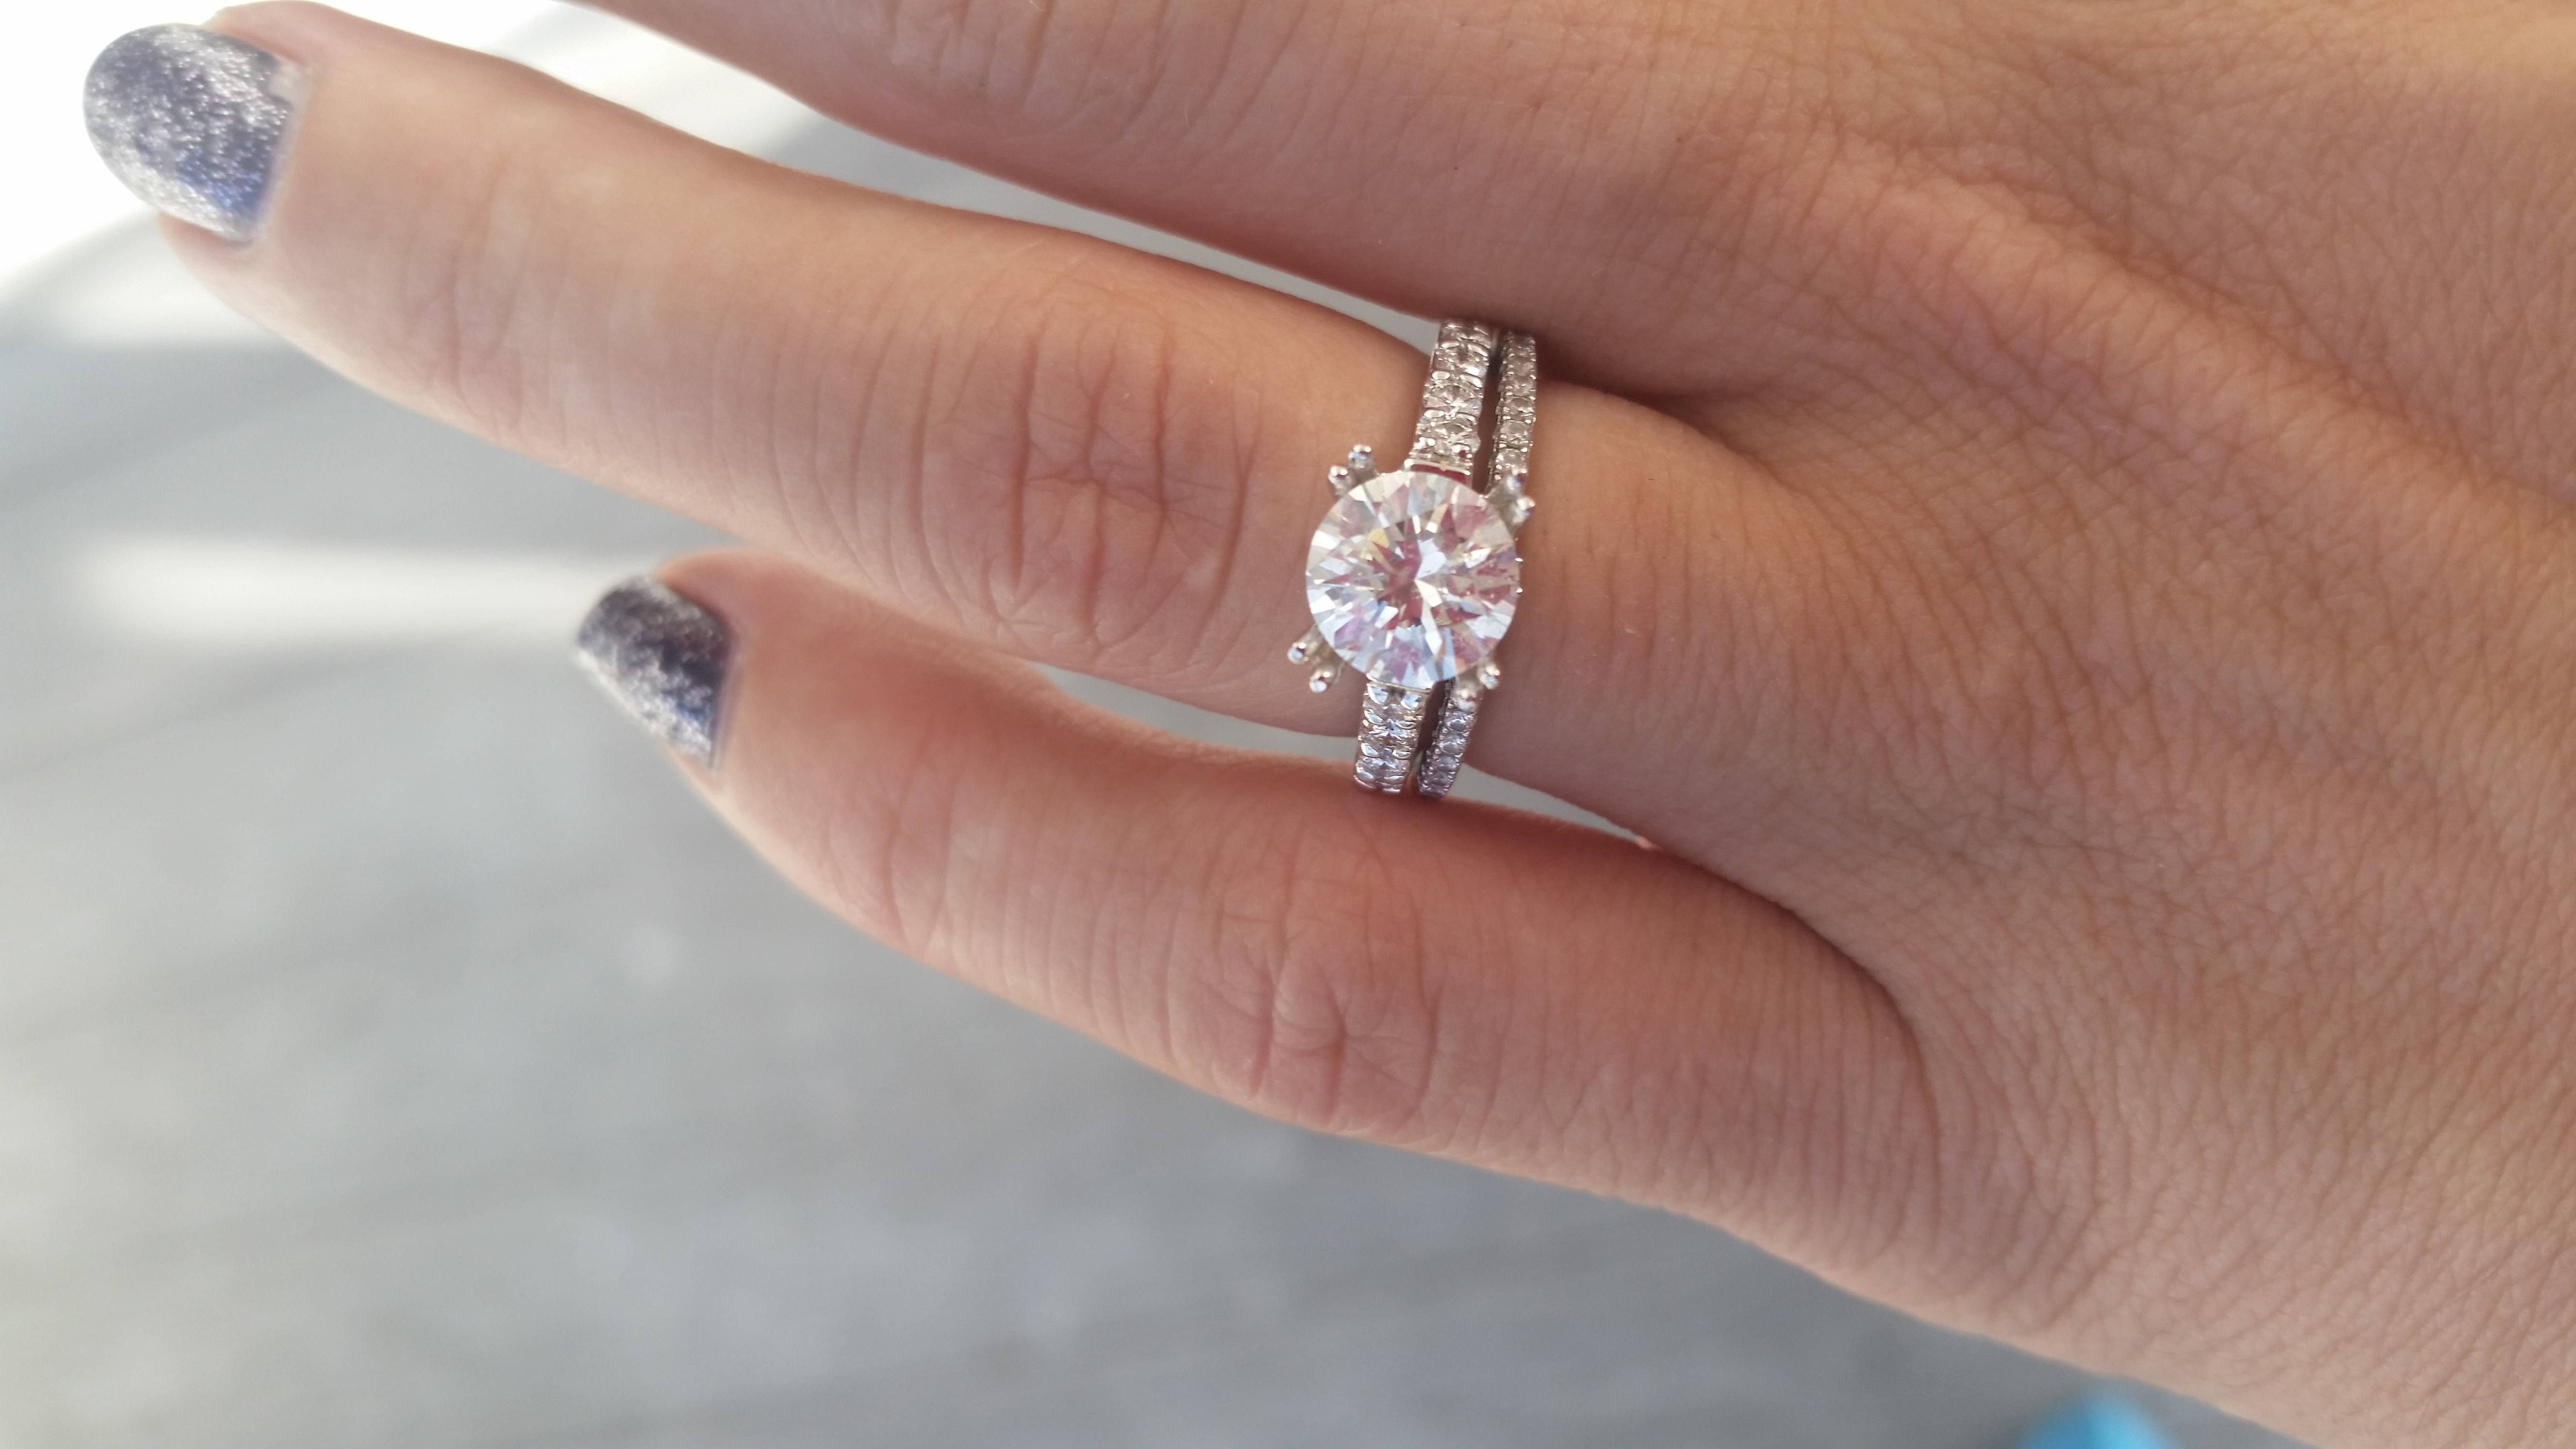 Need To See Some Size 4 Fingers With Engagement Rings! – Weddingbee With Regard To Size 4 Diamond Engagement Rings (View 3 of 15)